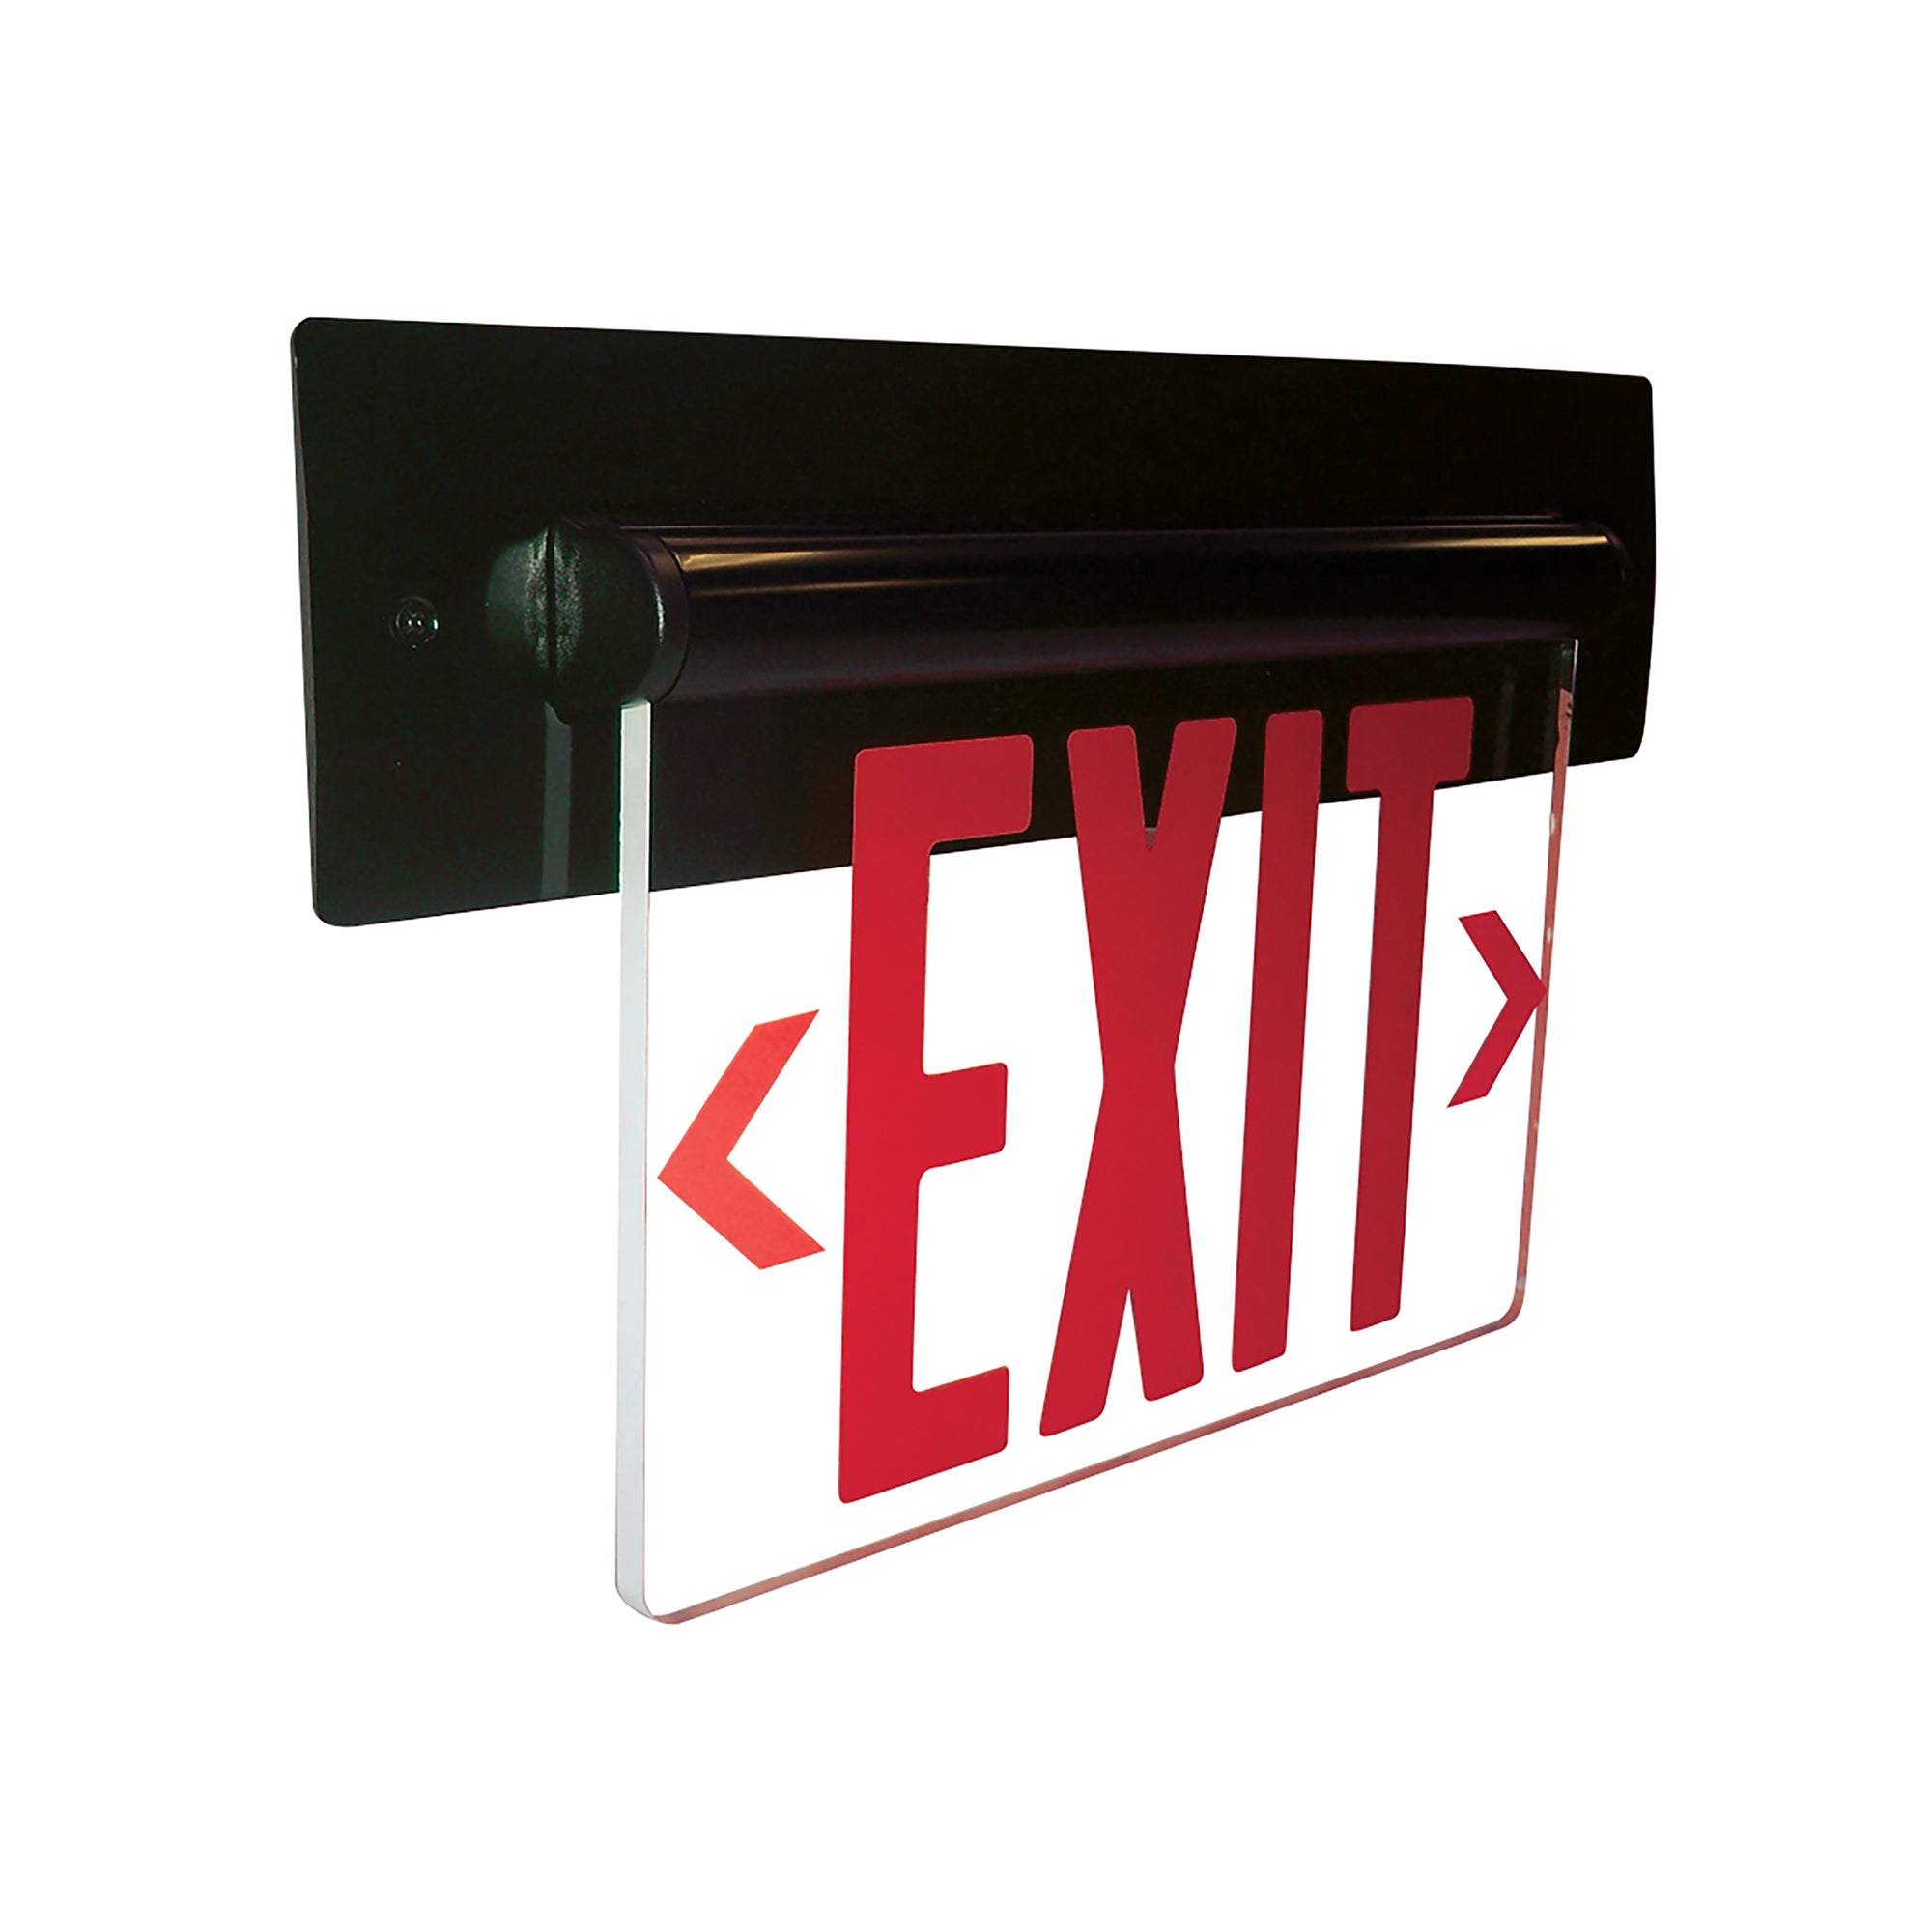 Nora Lighting NX-813-LEDRCB - Exit / Emergency - Recessed Adjustable LED Edge-Lit Exit Sign, AC Only, 6 Inch Red Letters, Single Face / Clear Acrylic, Black Housing